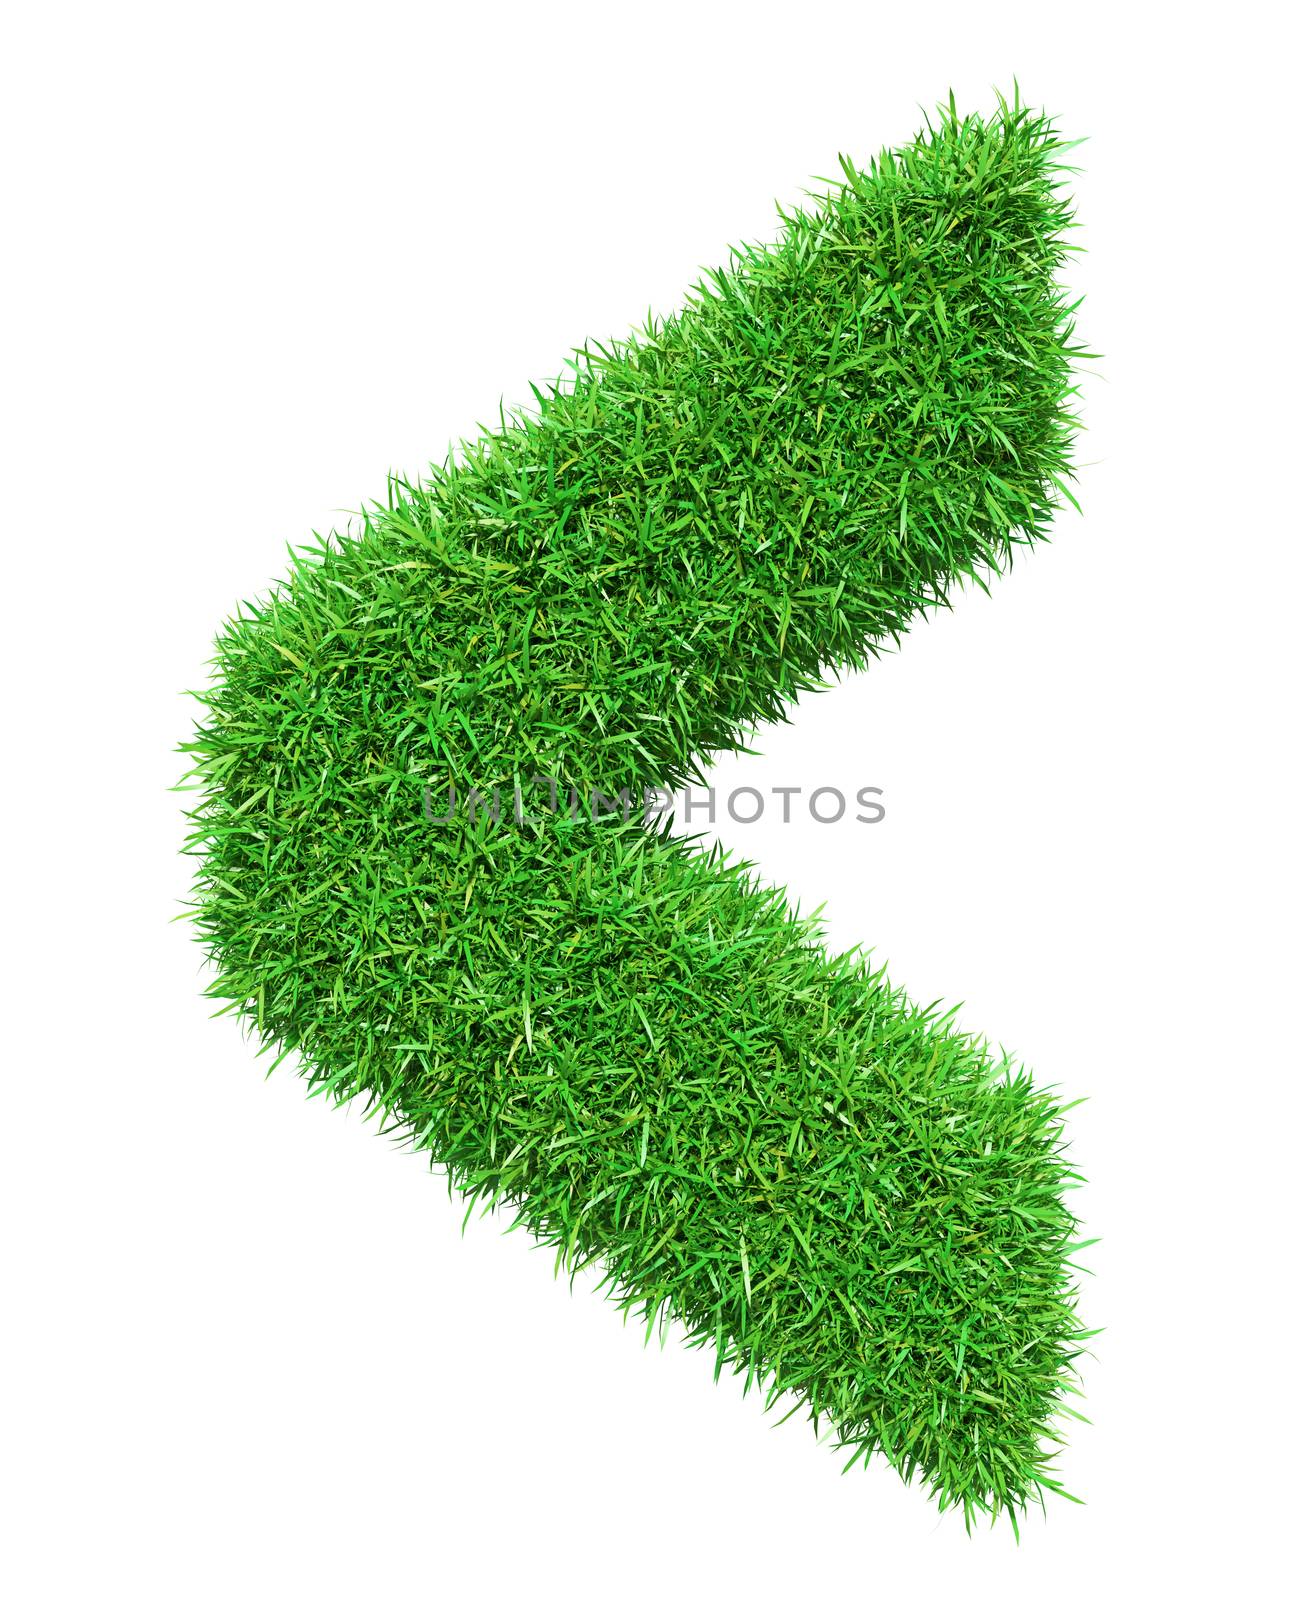 Green grass check mark, isolated on white background. 3D illustration